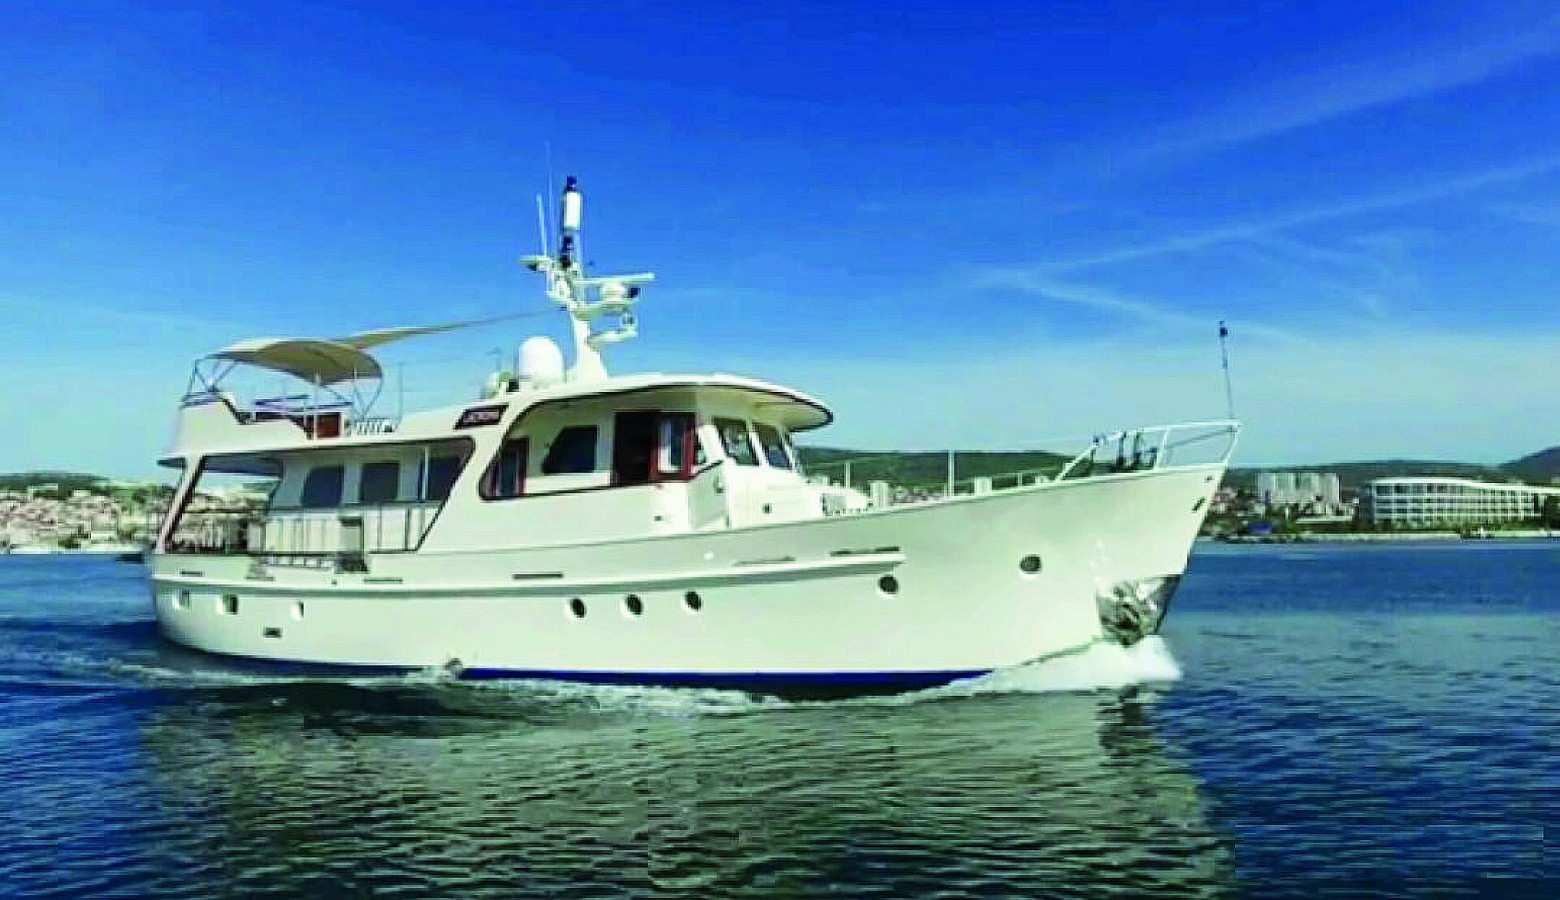 20 meter motor yacht for sale